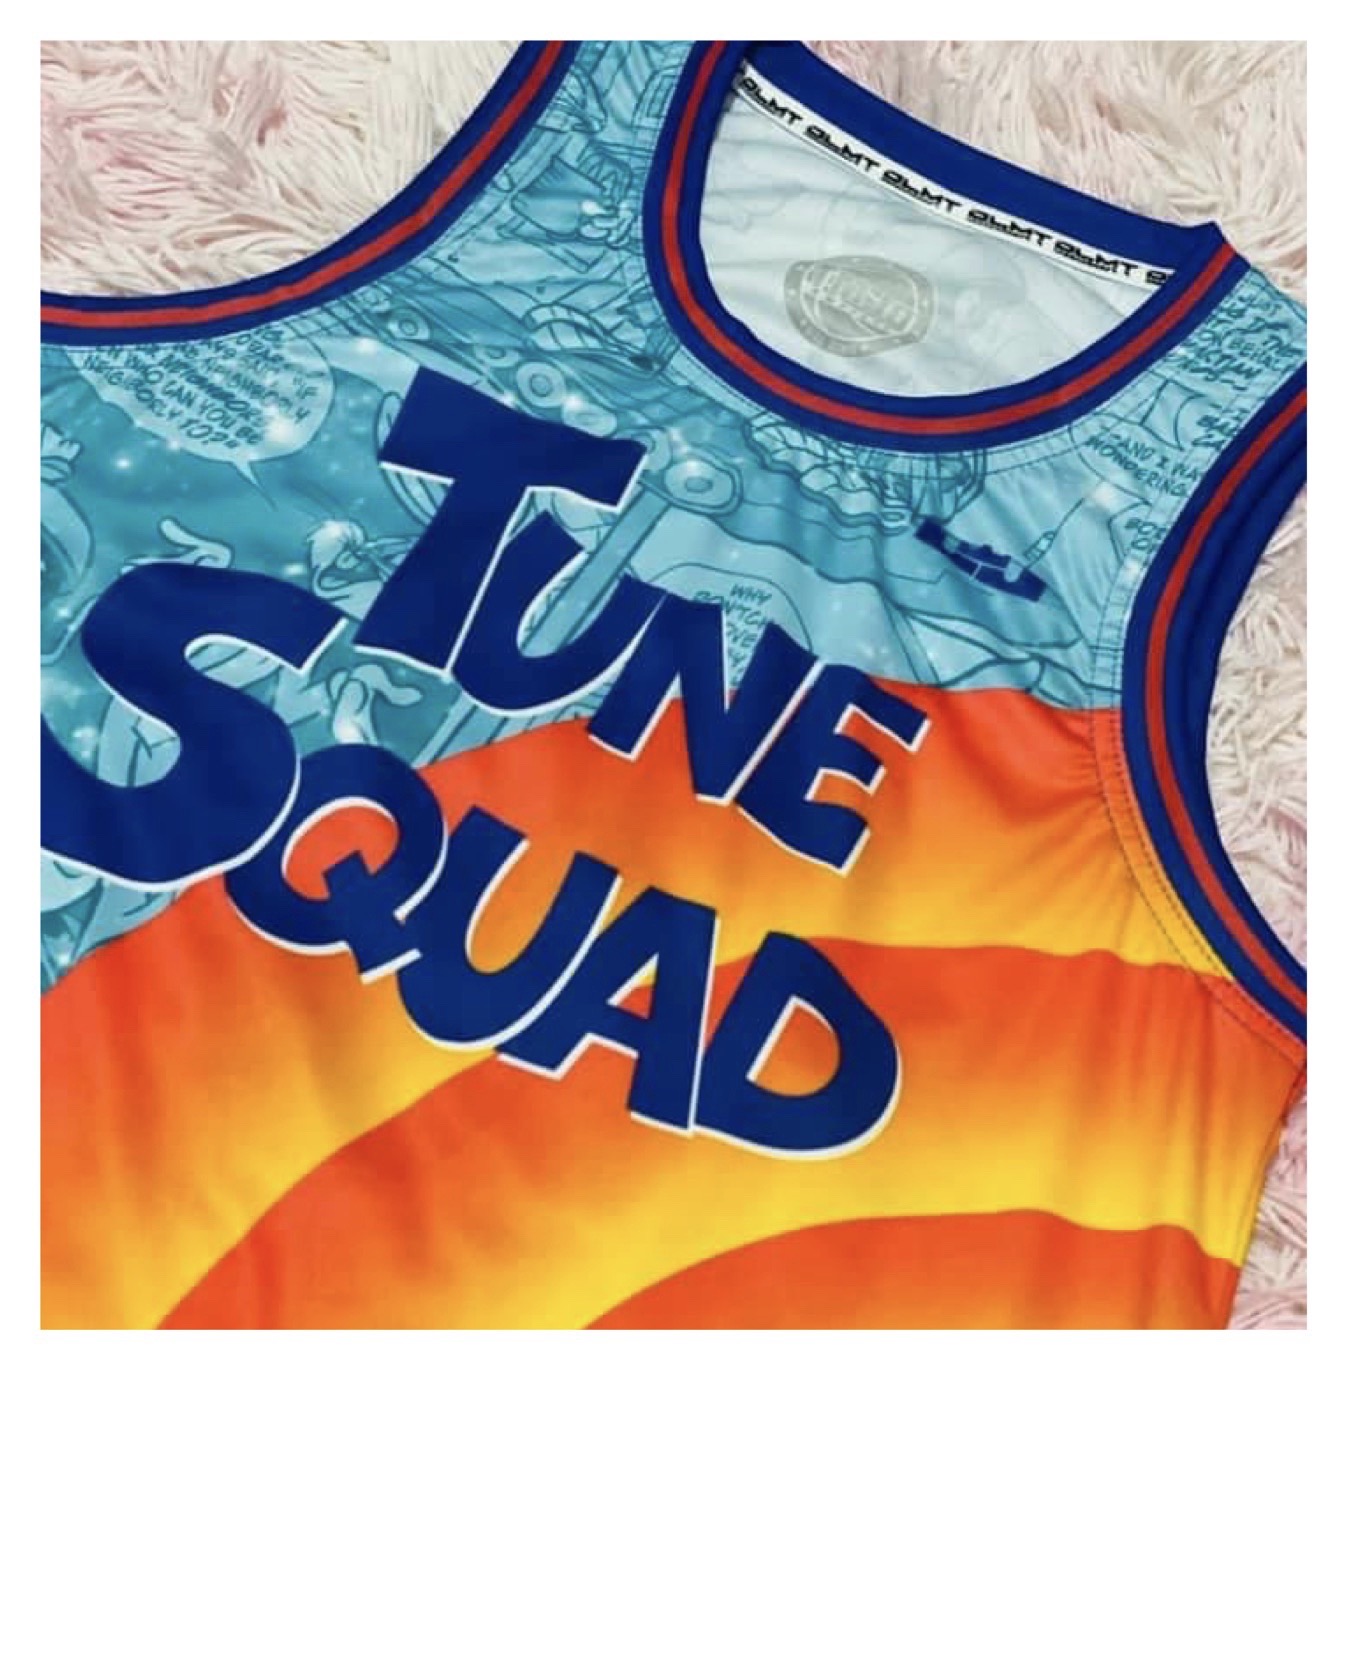 NBA TUNE SQUAD - LEBRON JAMES SPACE JAM CODE DLMT002 FULL SUBLIMATION JERSEY  (FREE CHANGE TEAMNAME, SURNAME & NUMBER)